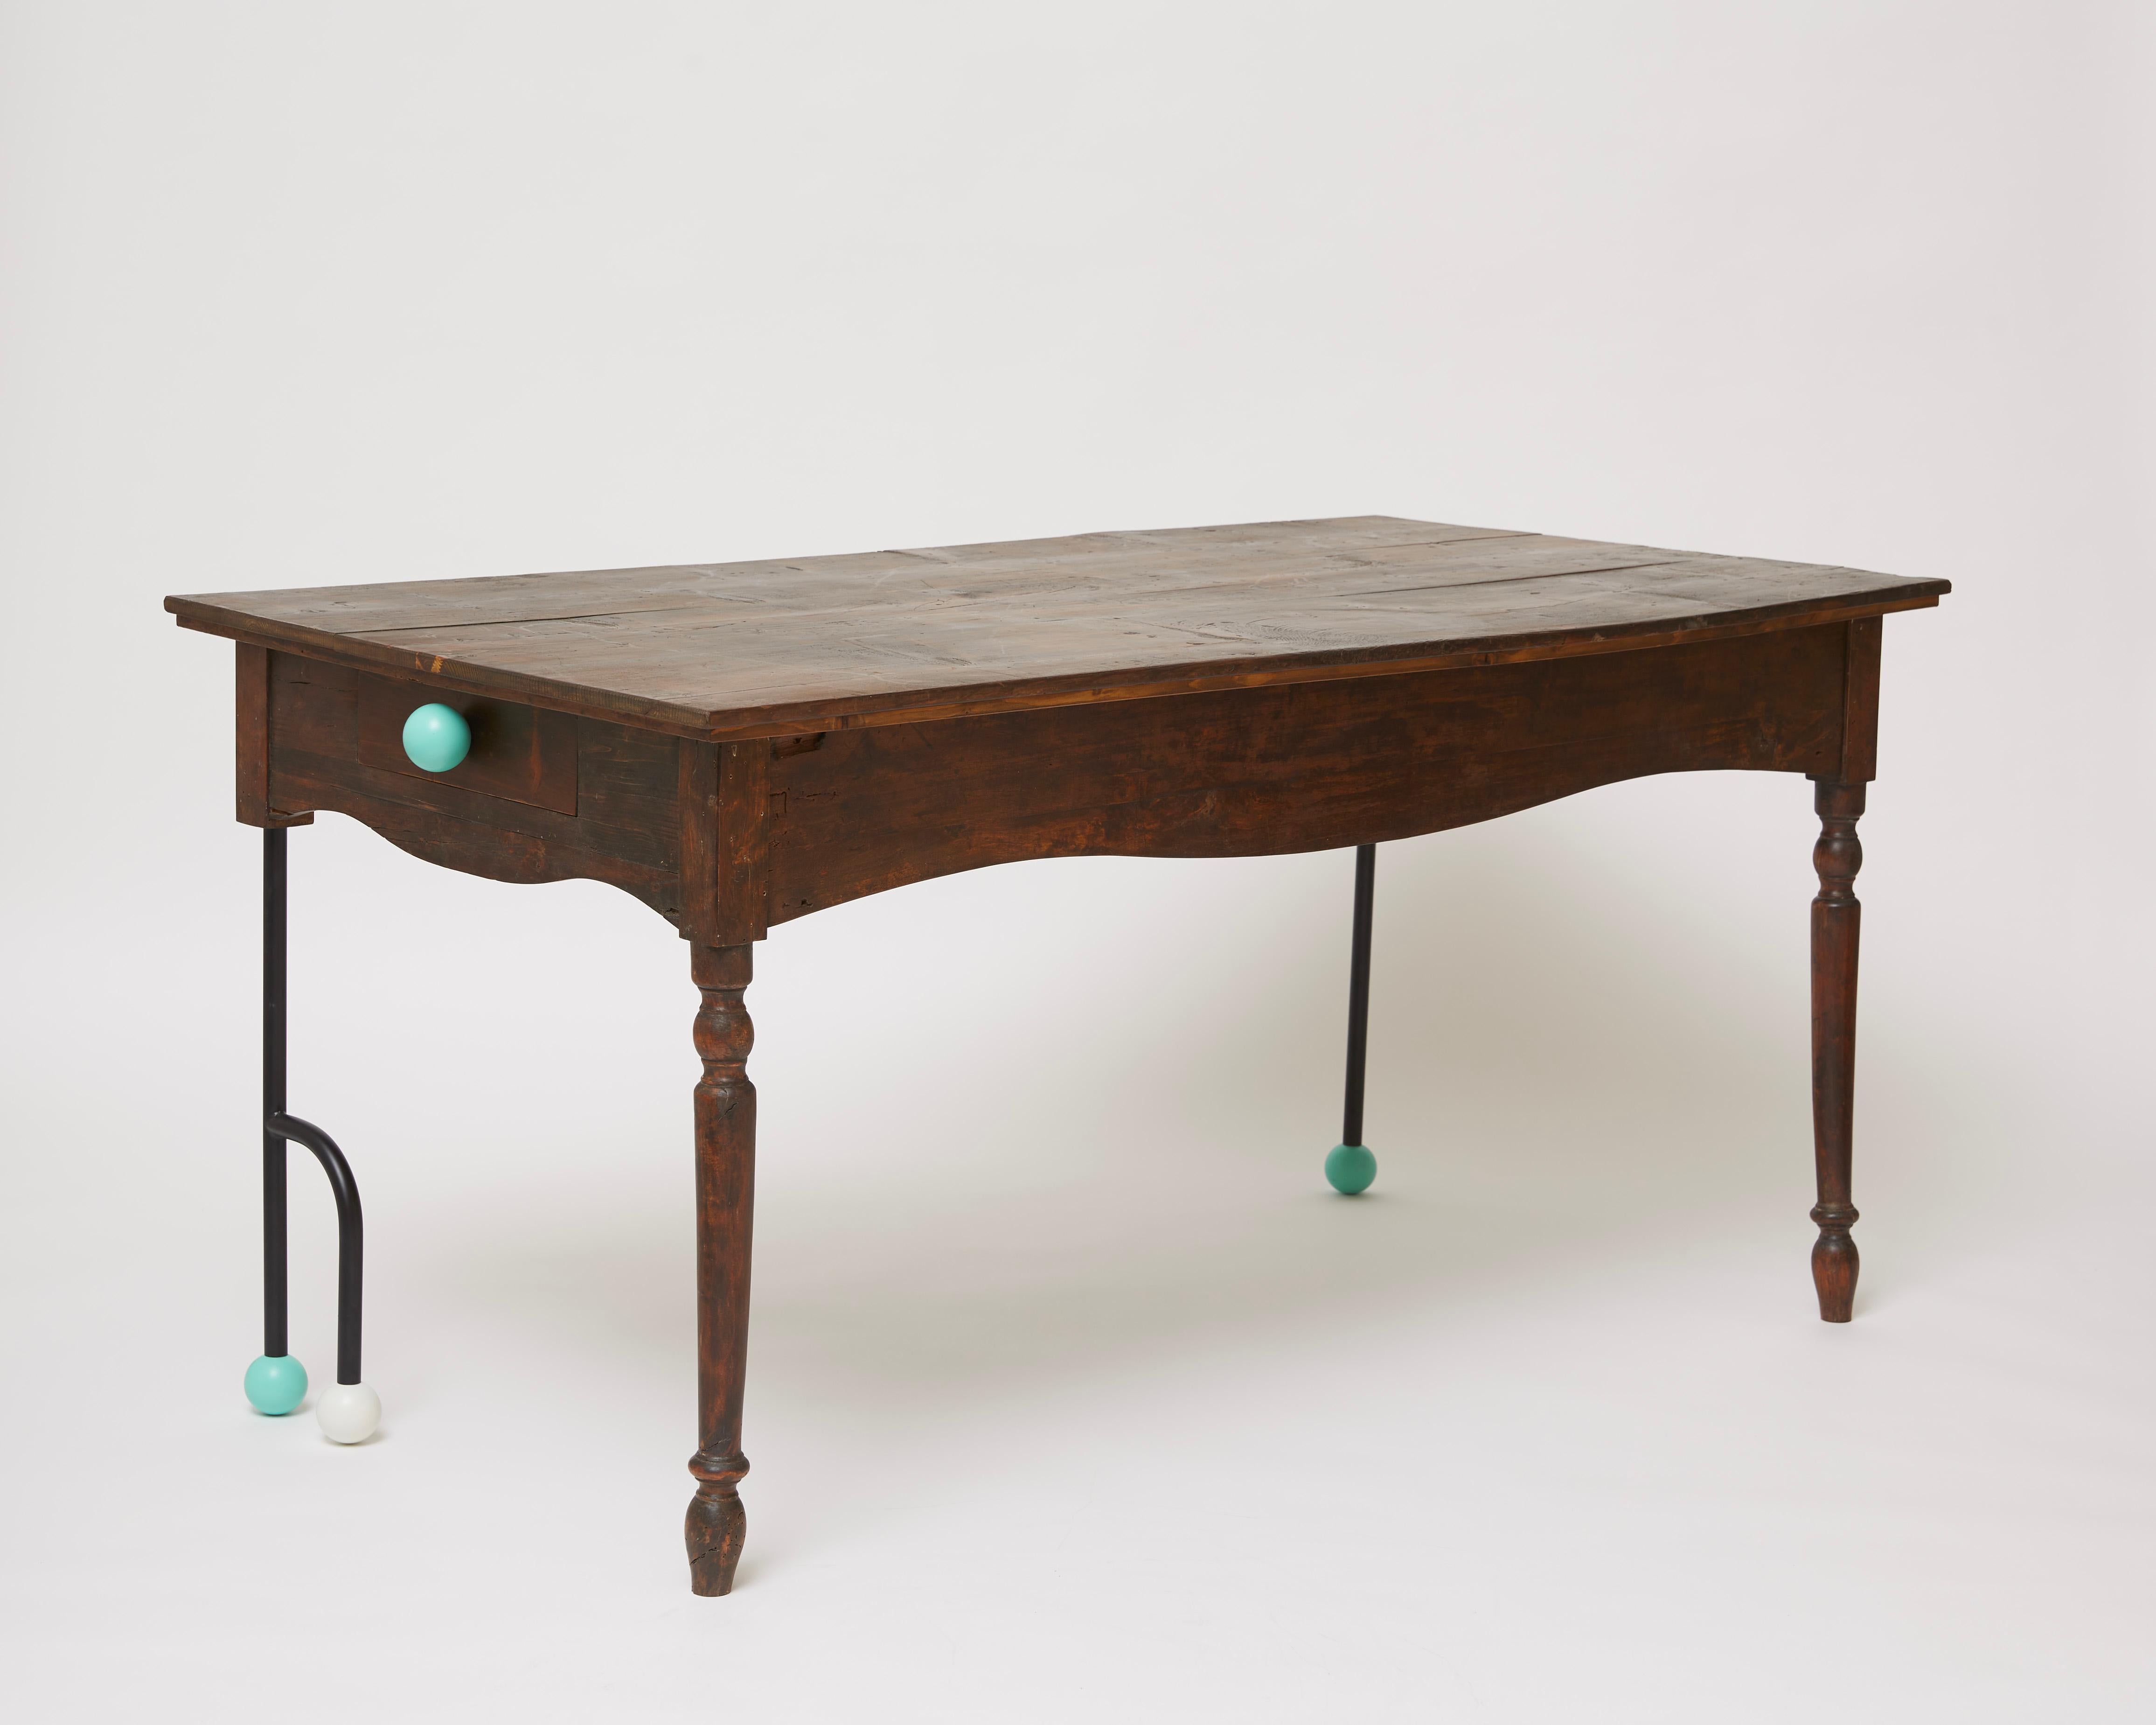 Brimming with eclectic charm, this rectangular table from the Morse Clash Collection embodies the audacious personality of an authentic objet d'art inspired by the dots and dashes of a language. The steel tube inserts and teal and ivory spherical